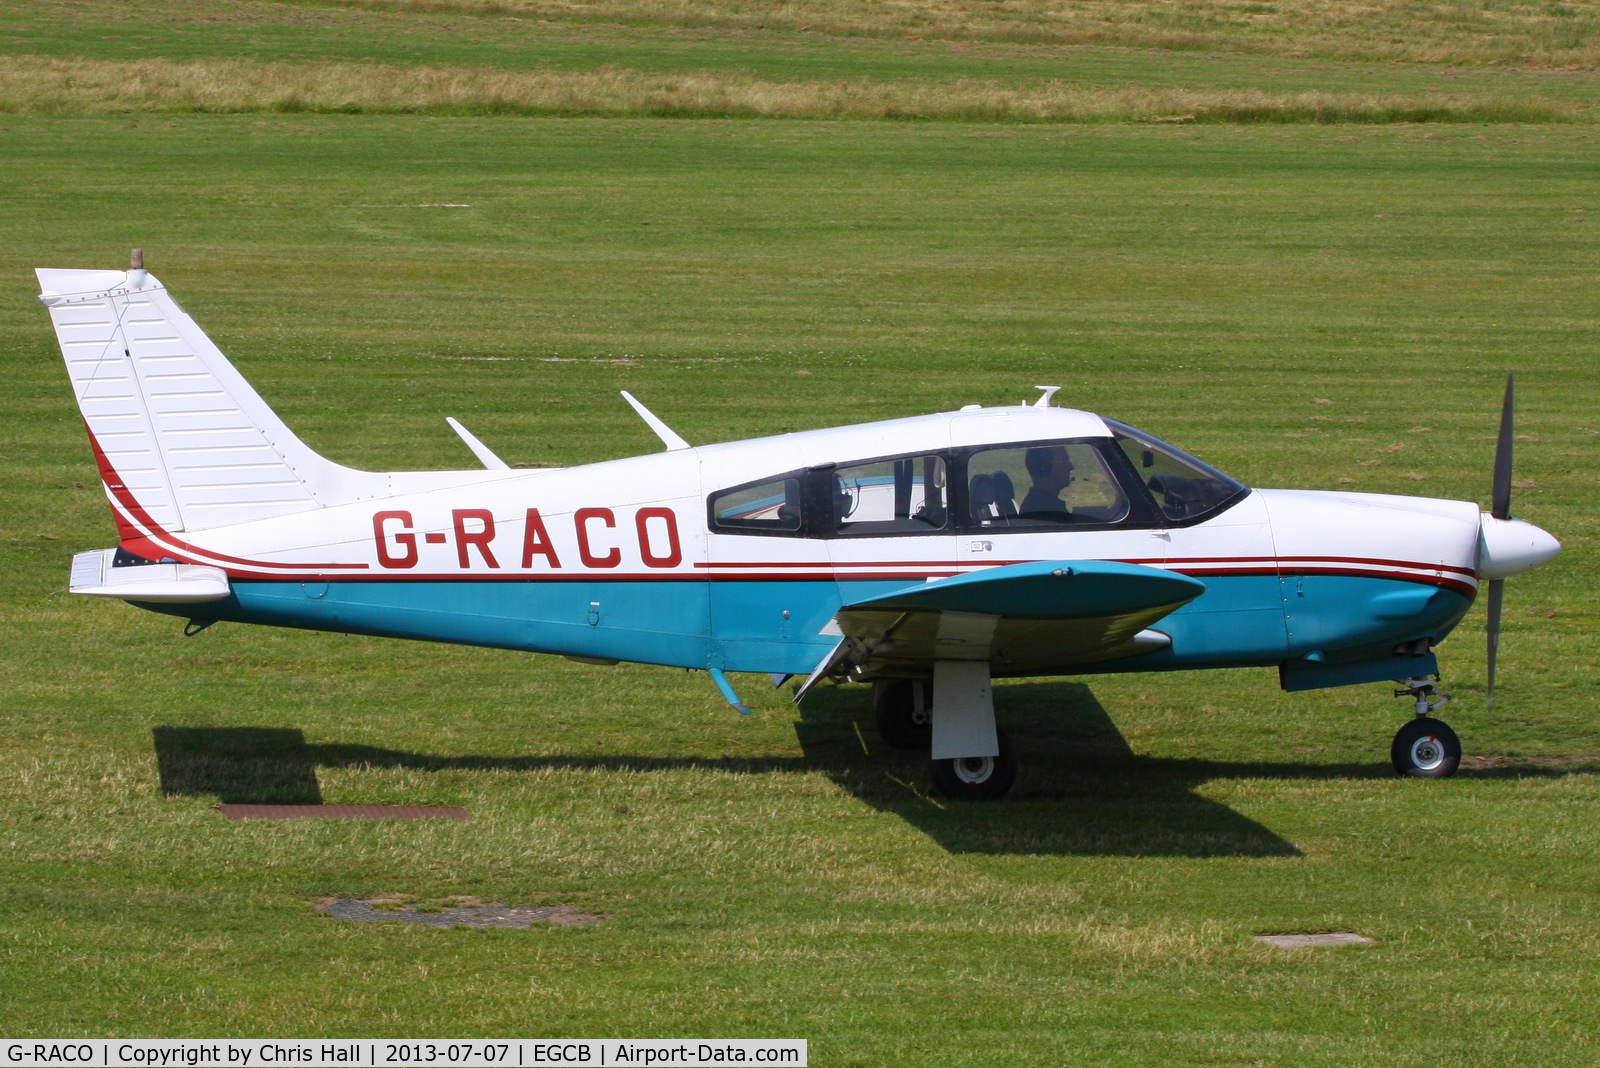 G-RACO, 1975 Piper PA-28R-200 Cherokee Arrow C/N 28R-7535300, at the Barton open day and fly in